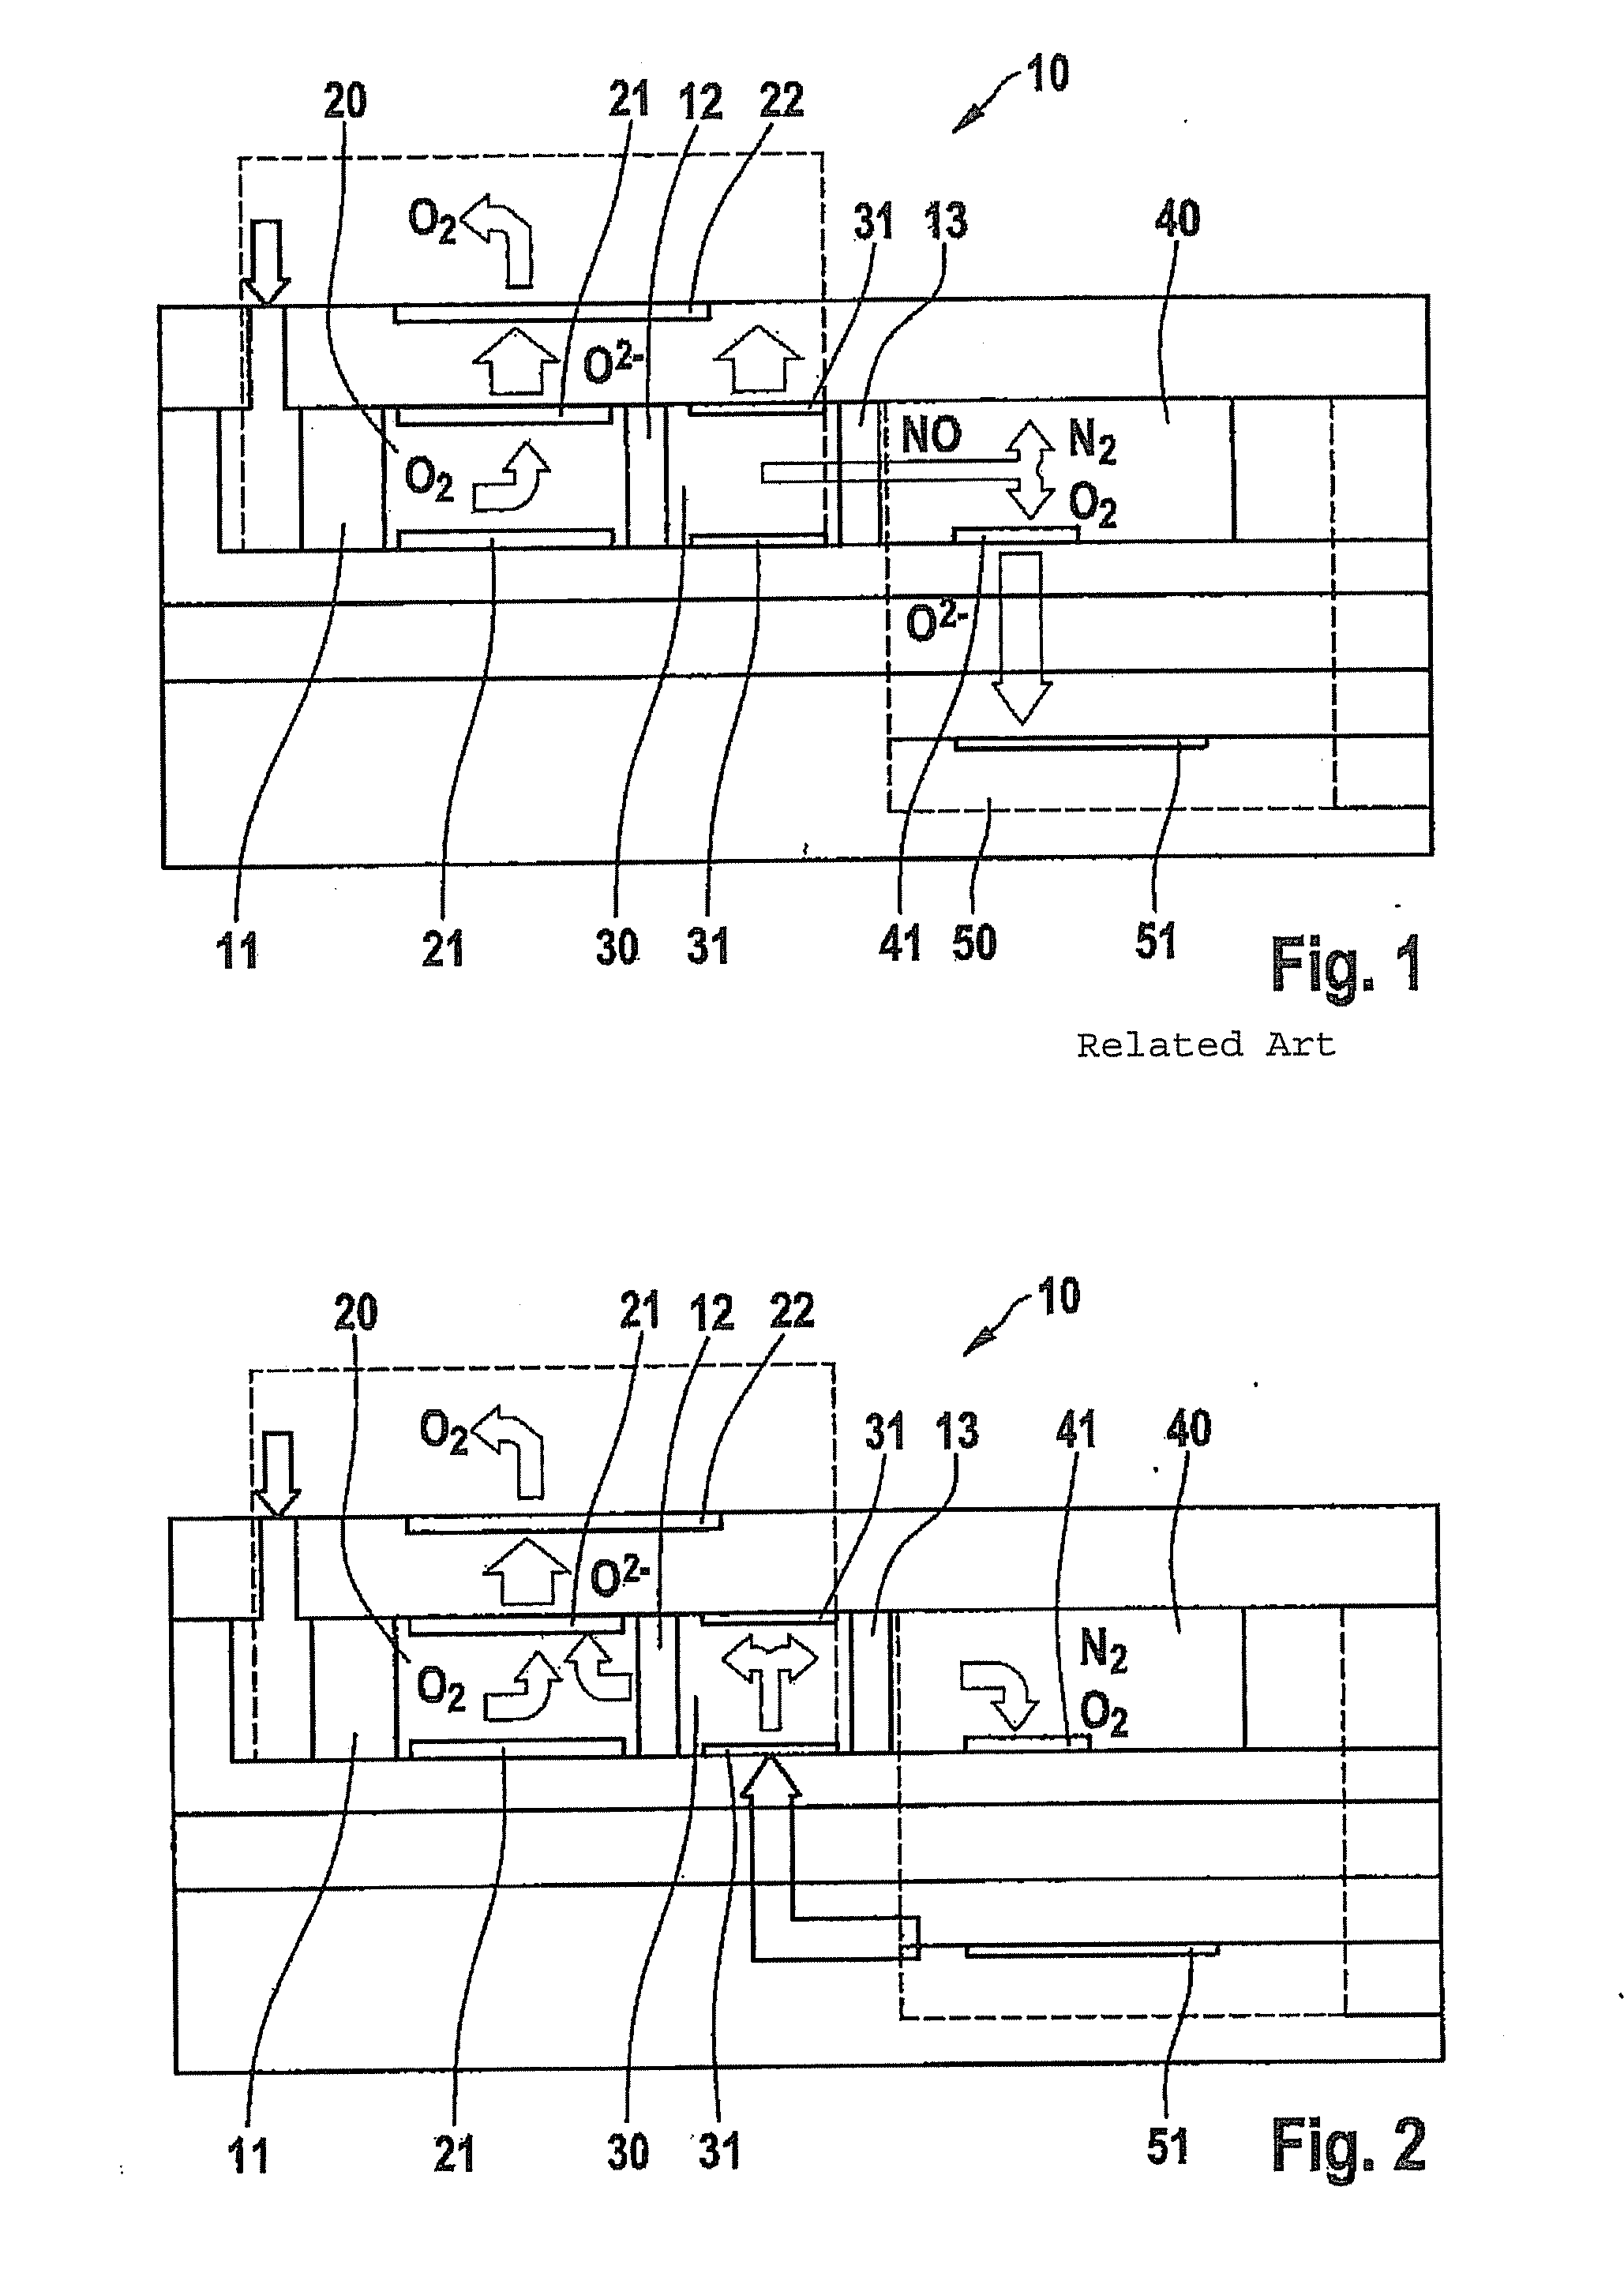 Method for measuring and/or calibrating a gas sensor